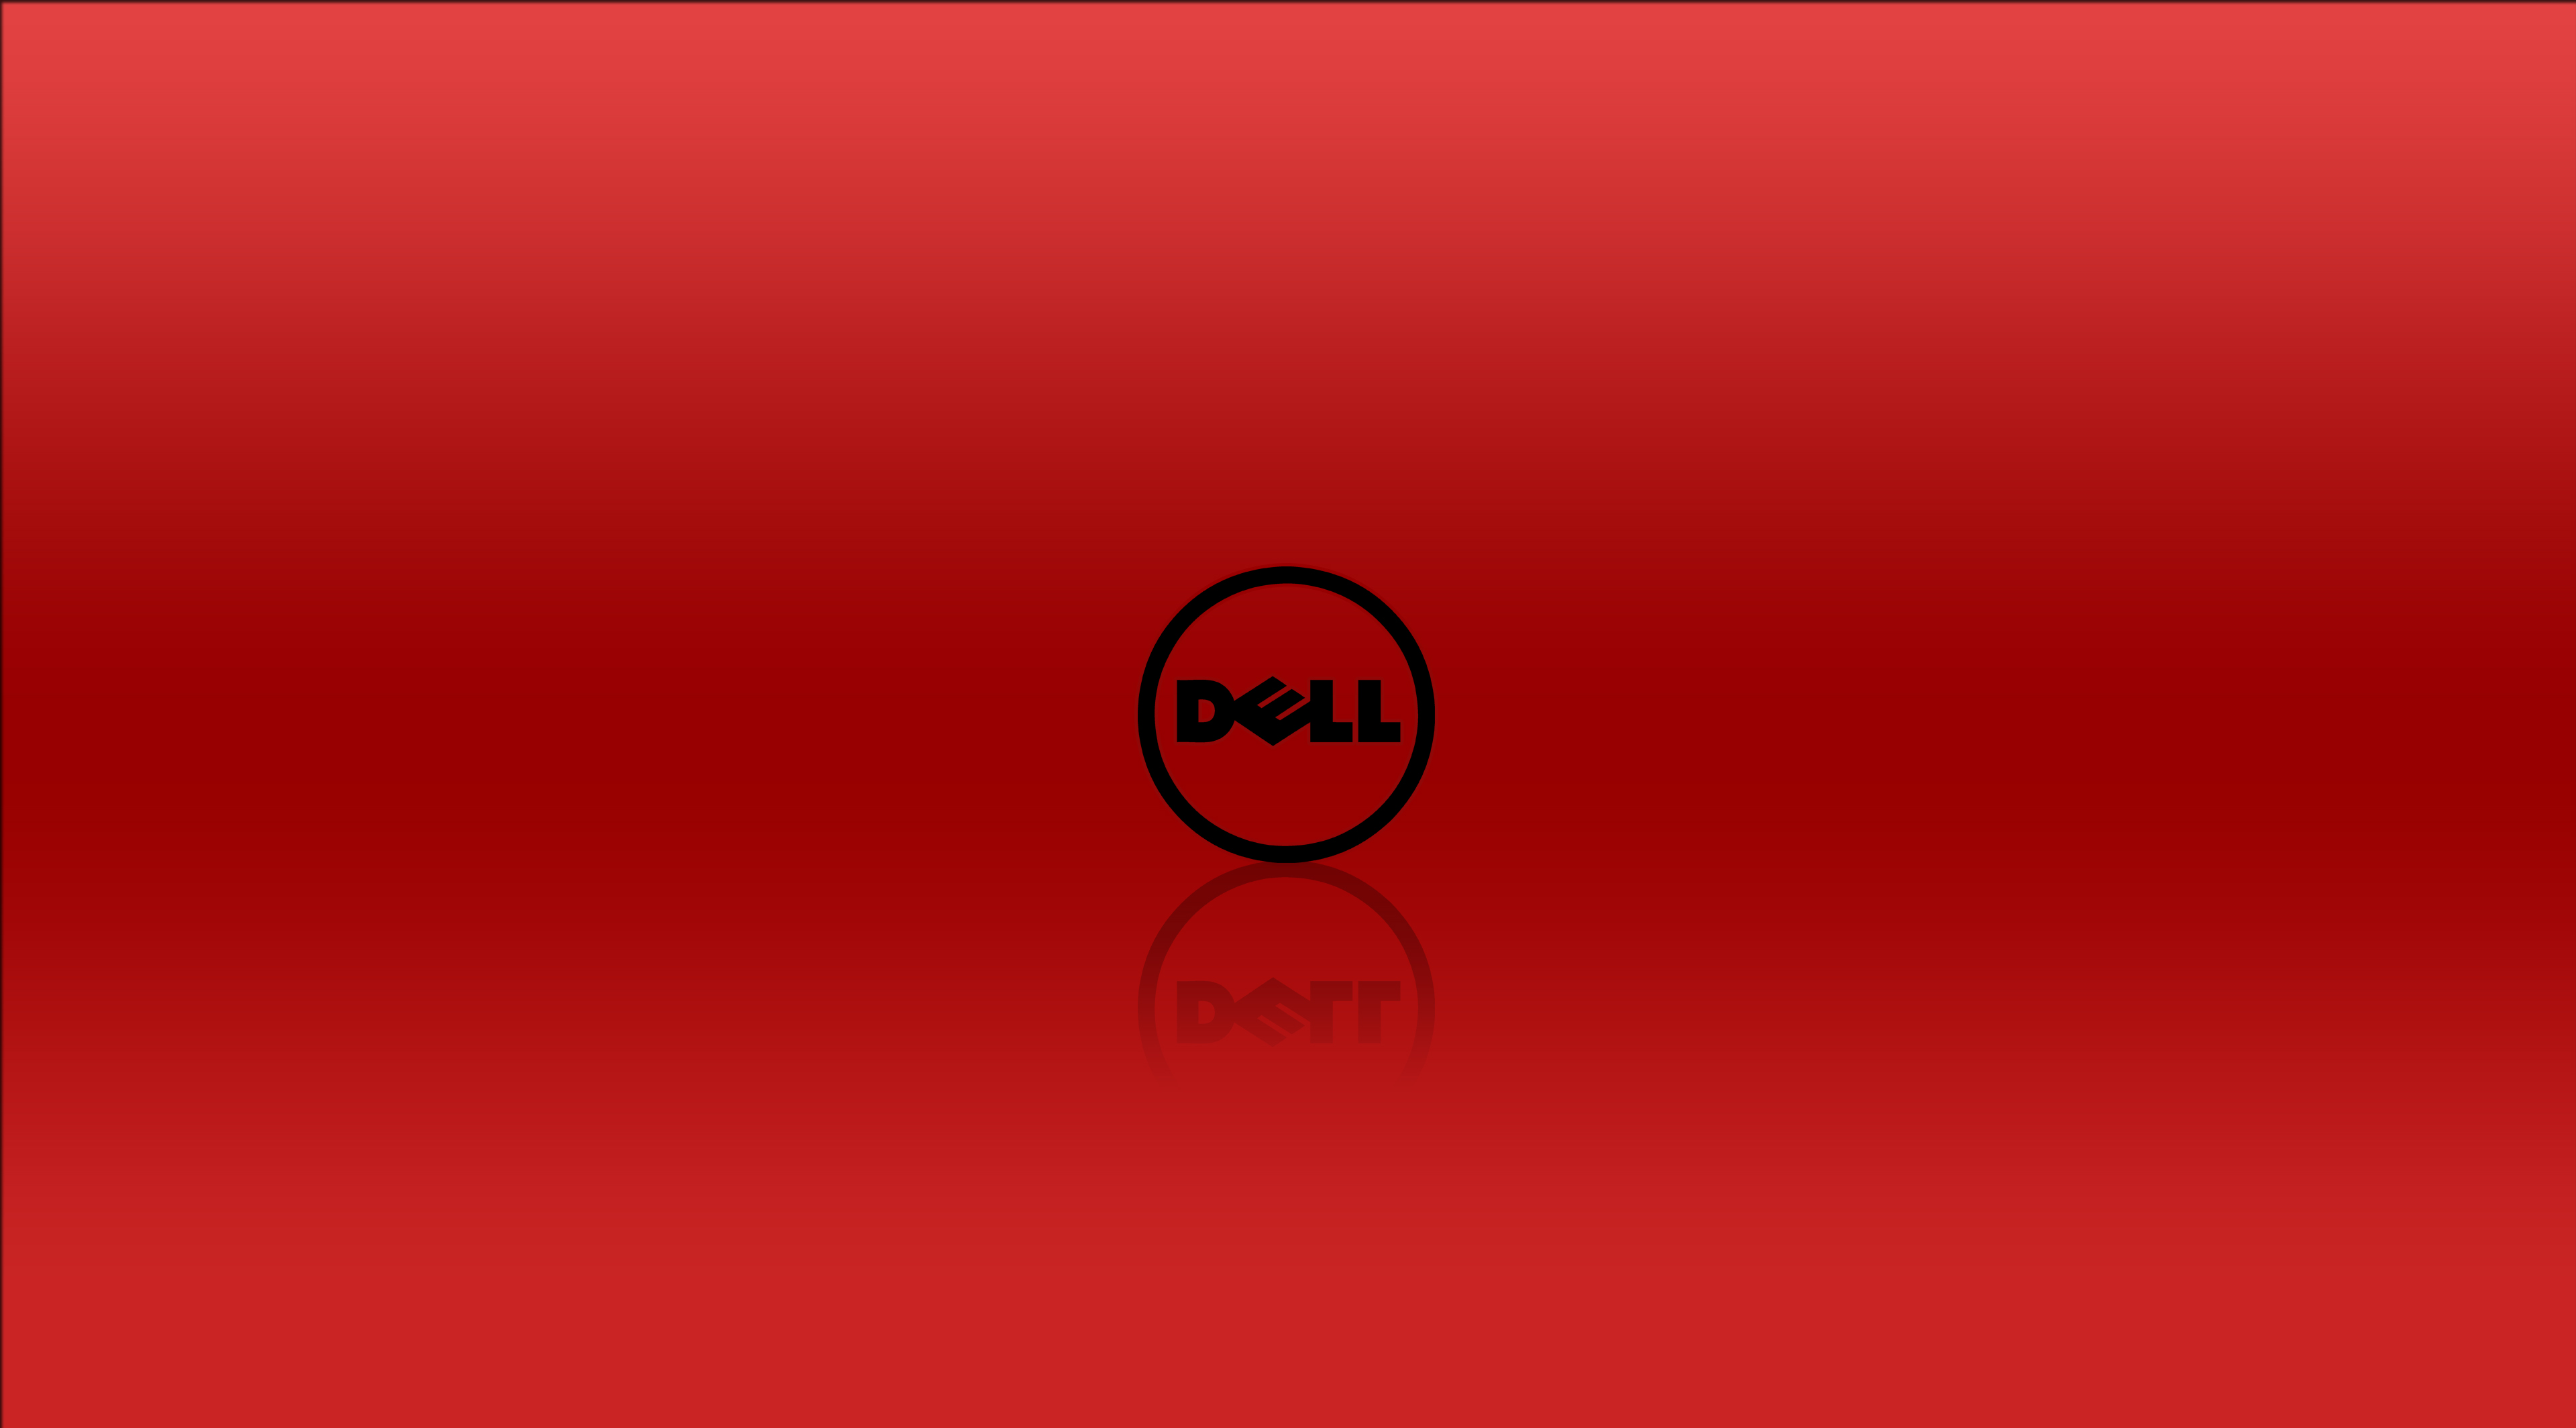 technology, dell lock screen backgrounds